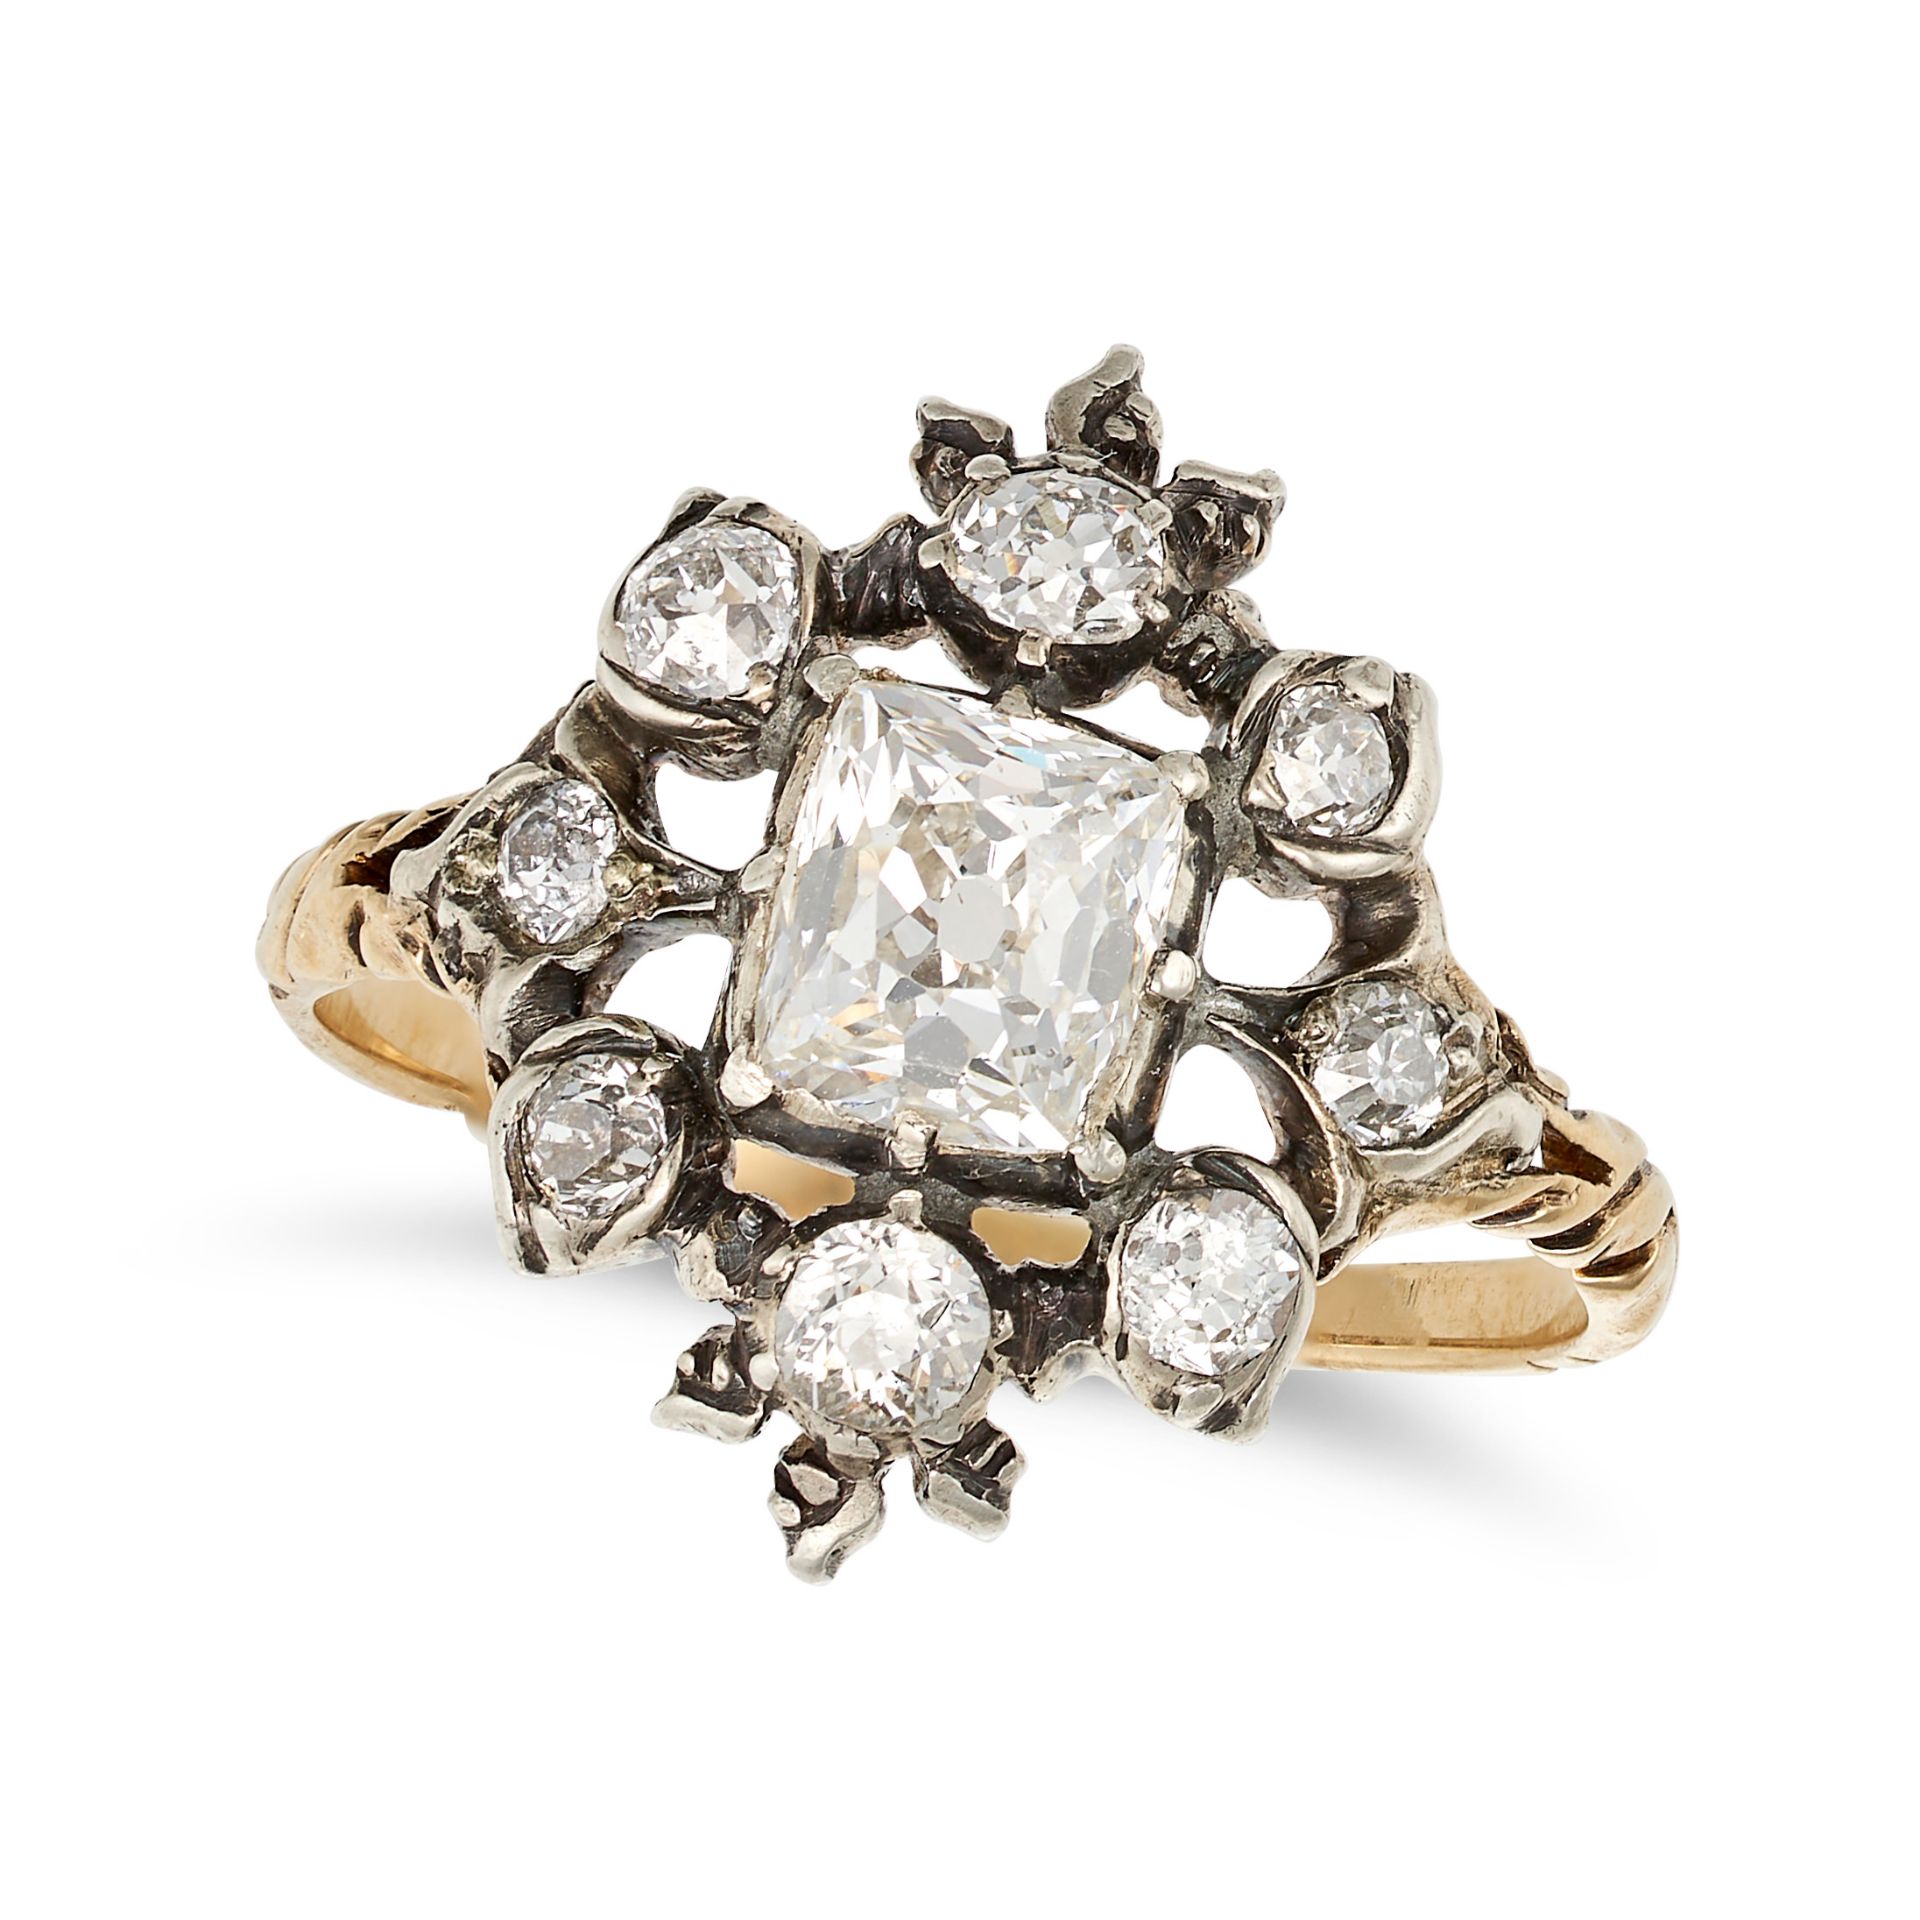 AN ANTIQUE DIAMOND RING in 14ct yellow gold and silver, set with an old cut diamond of approximat... - Image 2 of 2